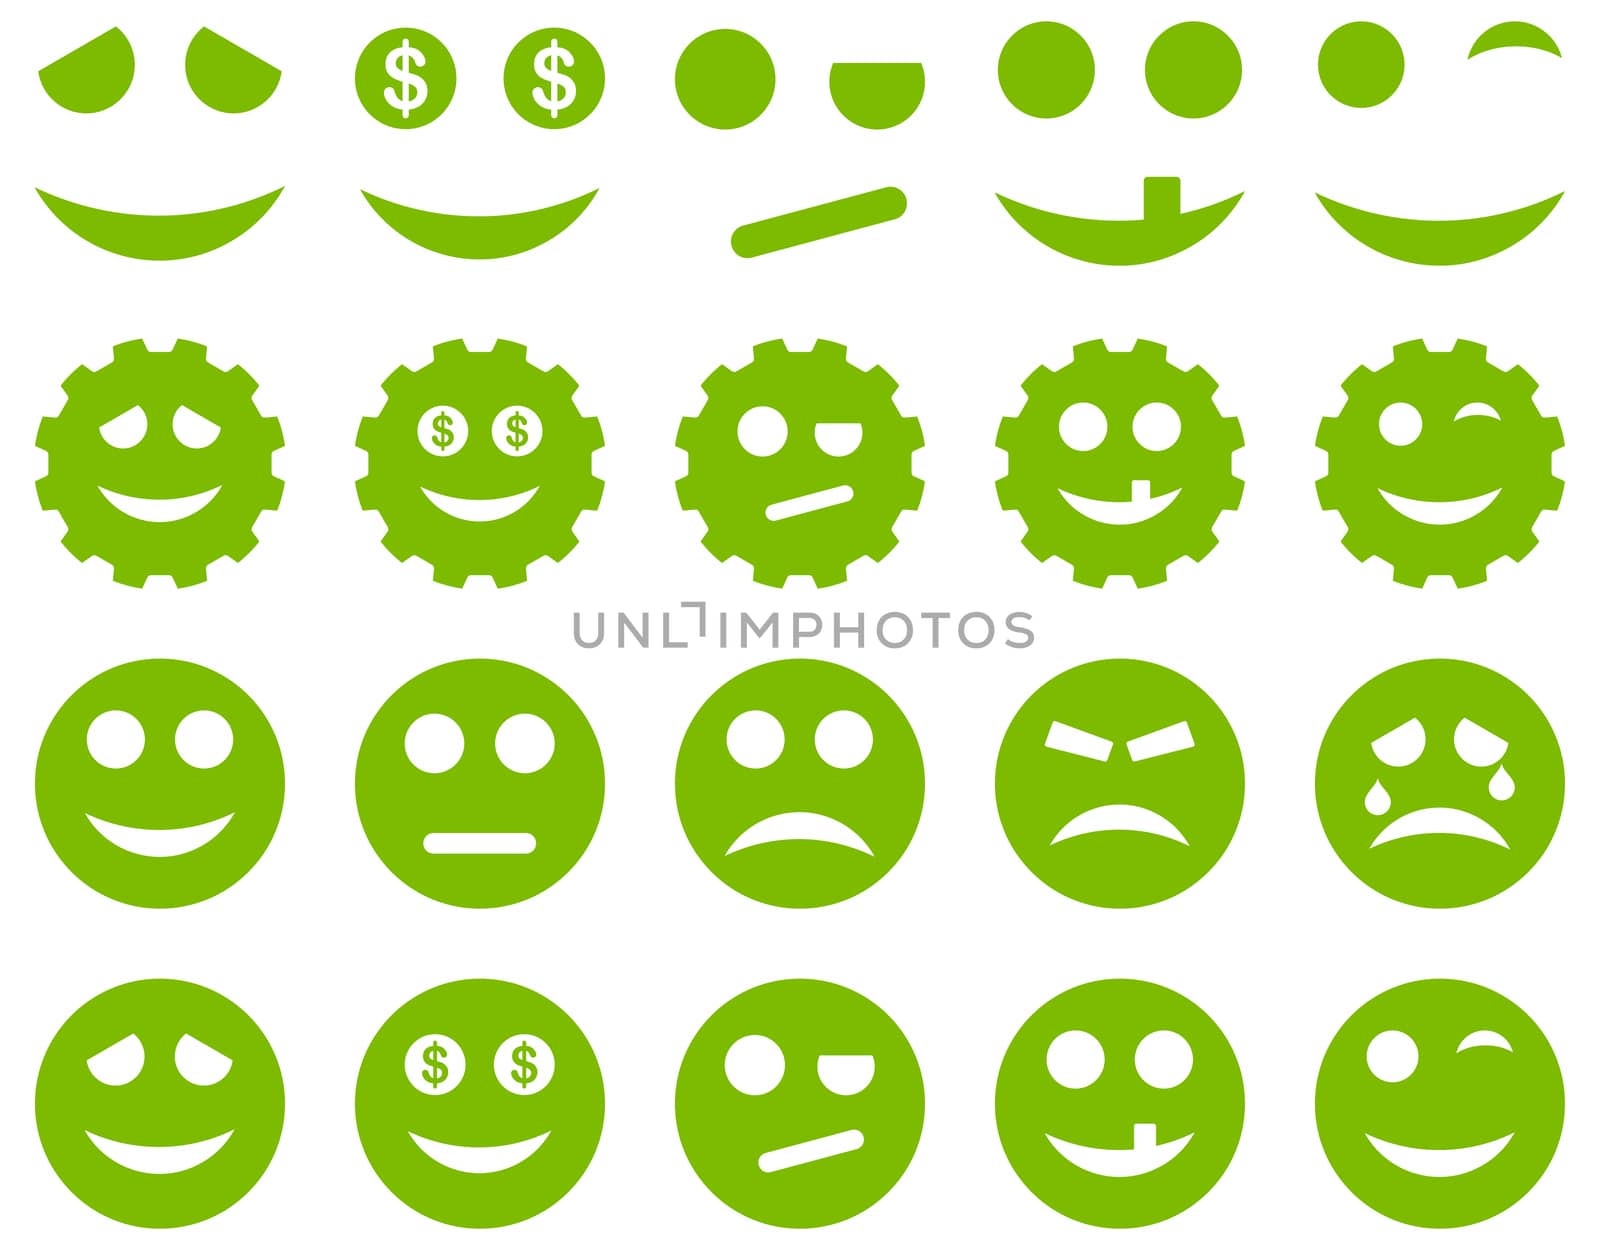 Tools, gears, smiles, emoticons icons by ahasoft